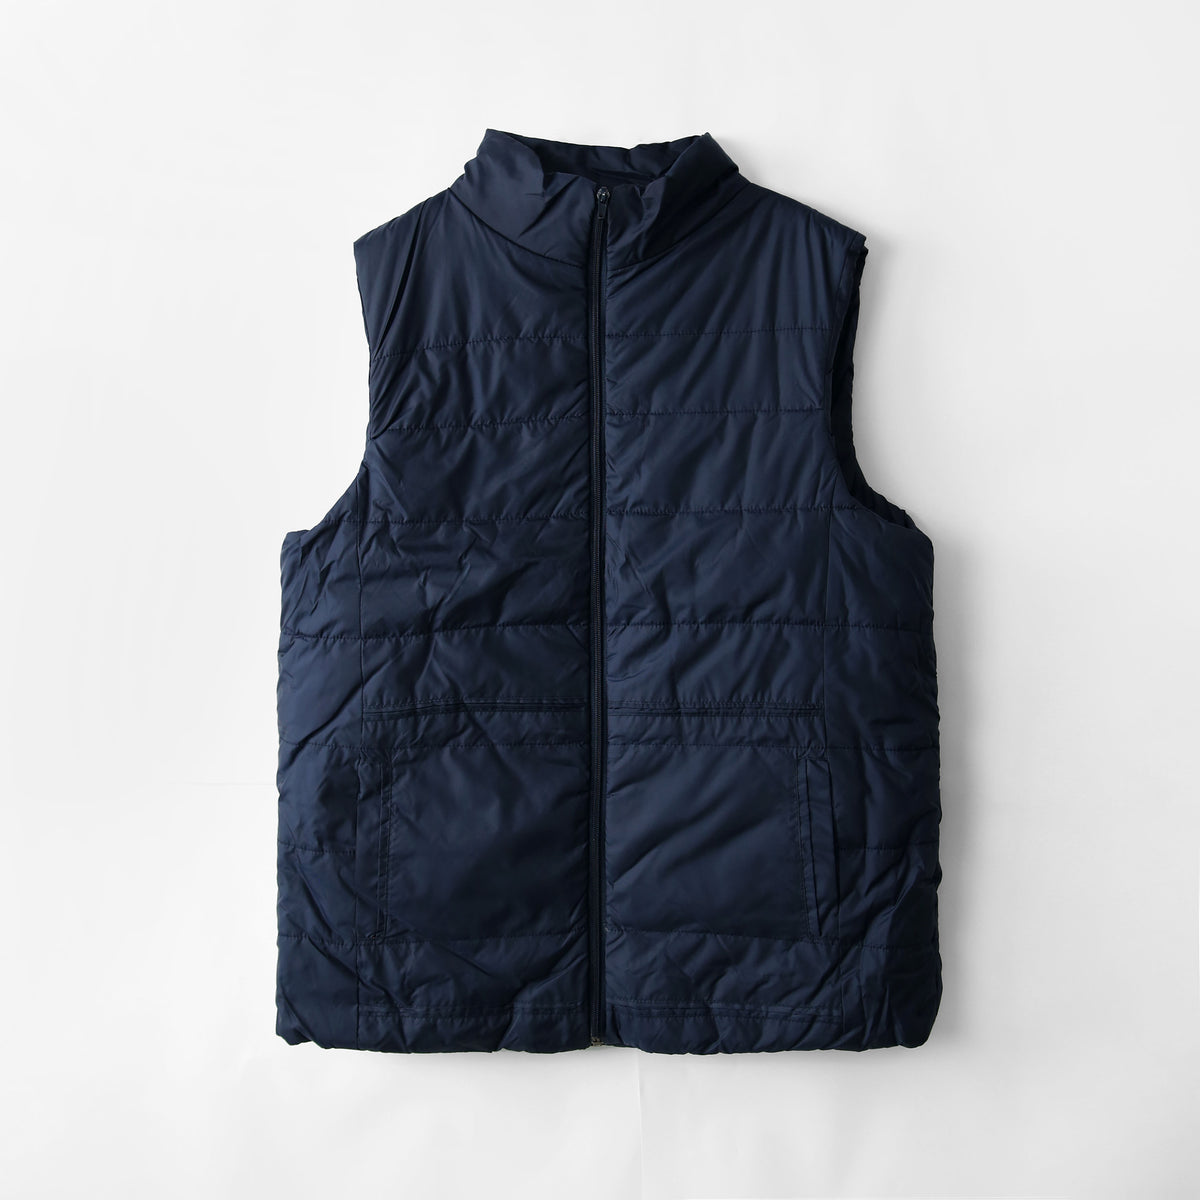 Exclusive Warm Puffer Sleeveless Blue Jacket For Men